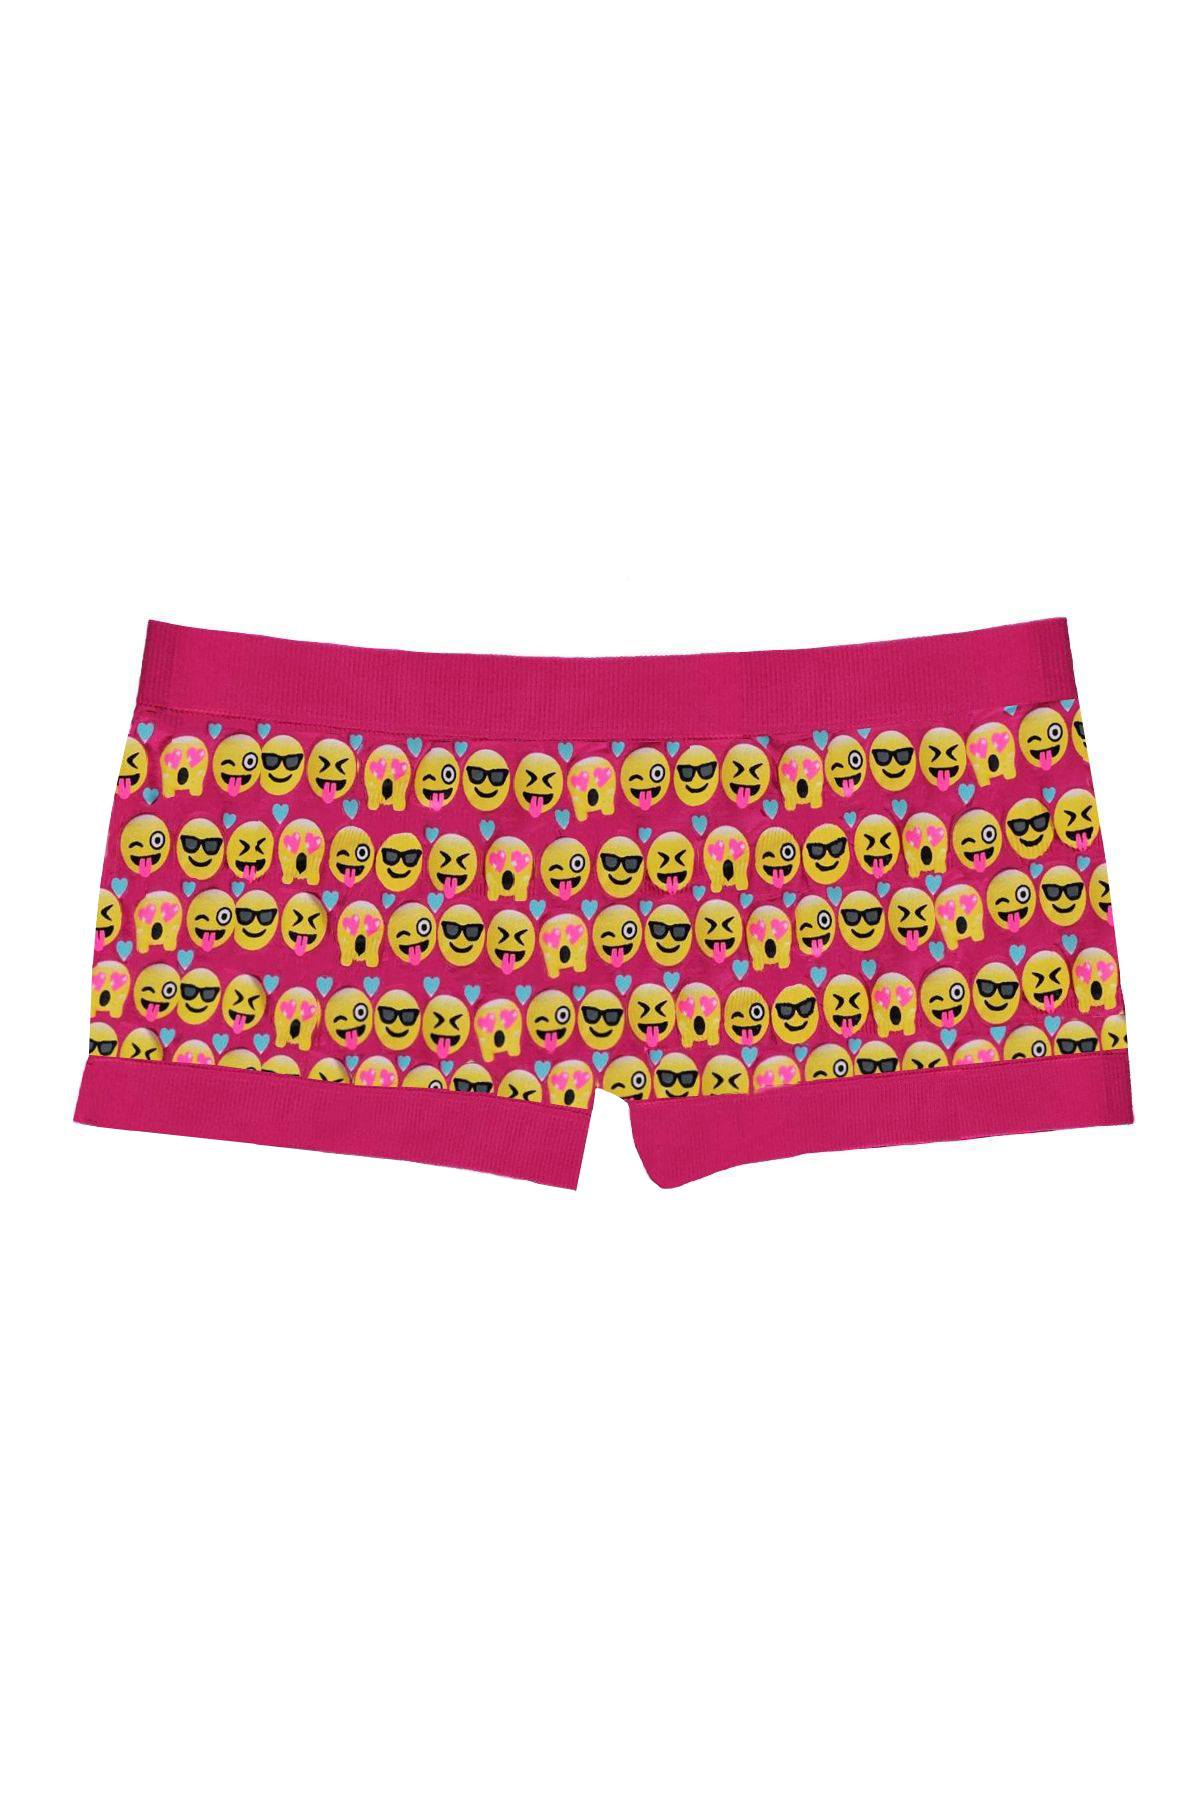 dermot mc donnell recommends big girl panties emoji pic